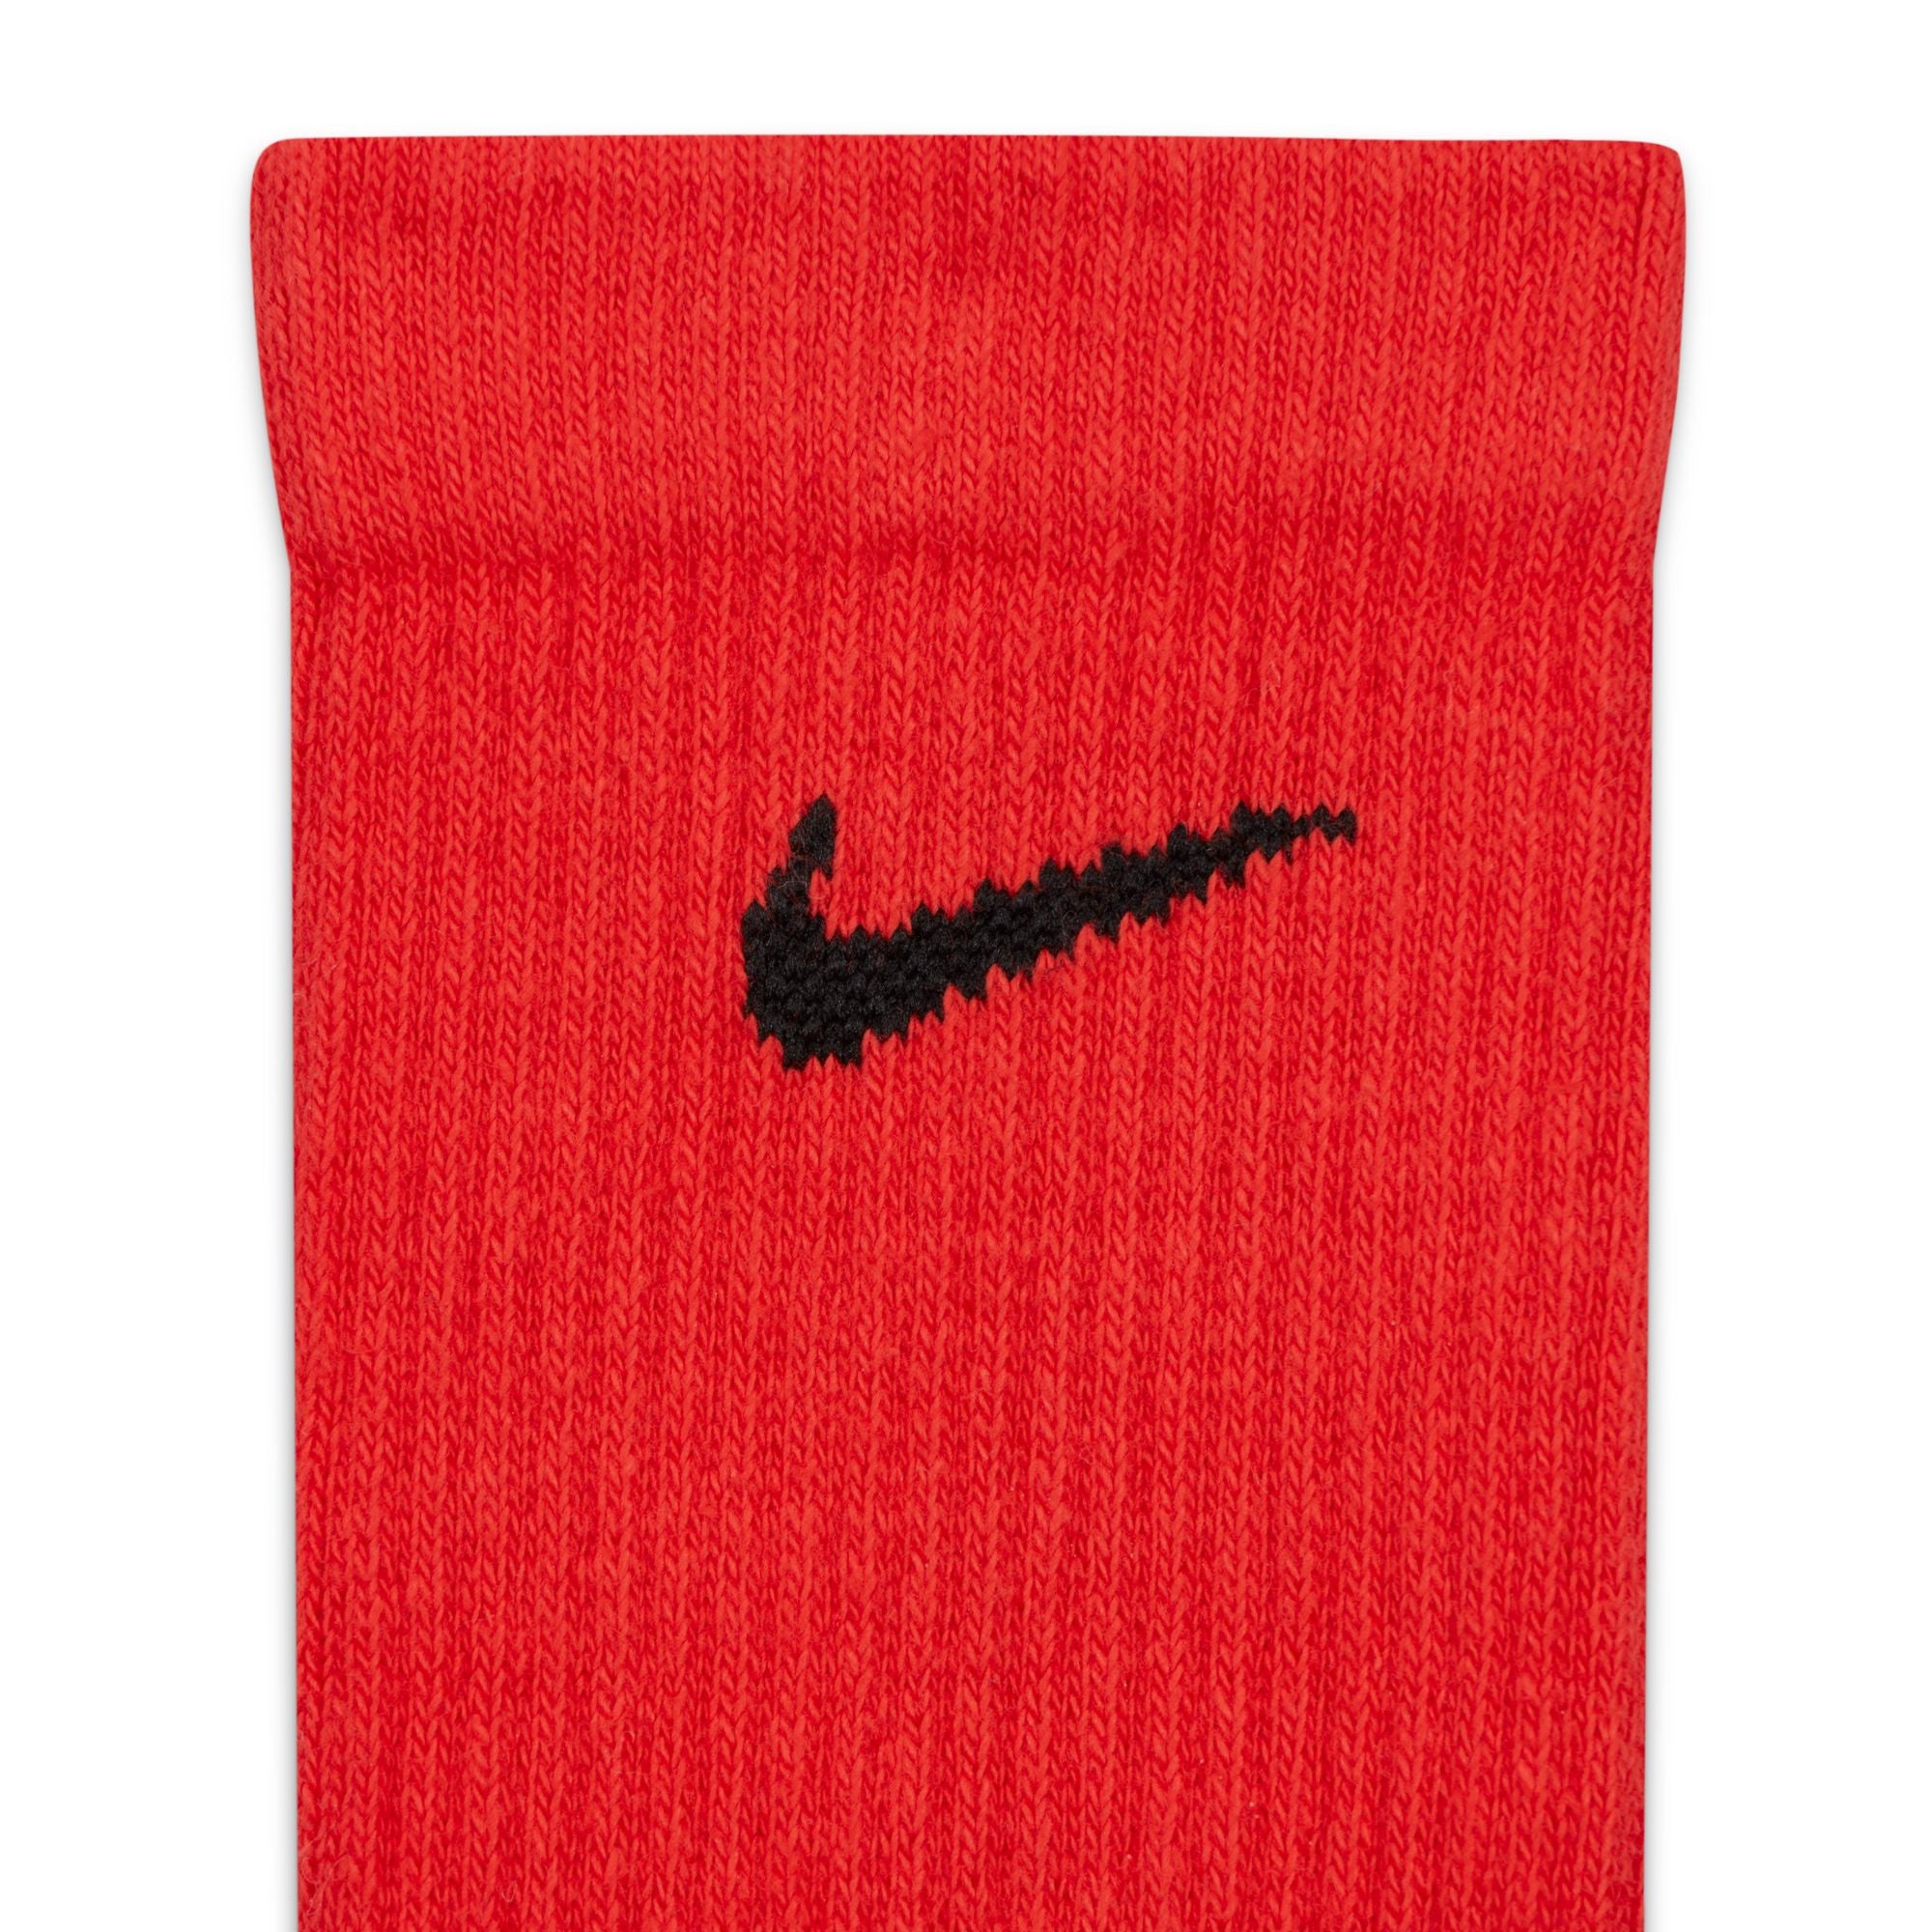 Nike Everyday Plus Cushioned Crew Socks - Red Green White Multicolour 3 Pack